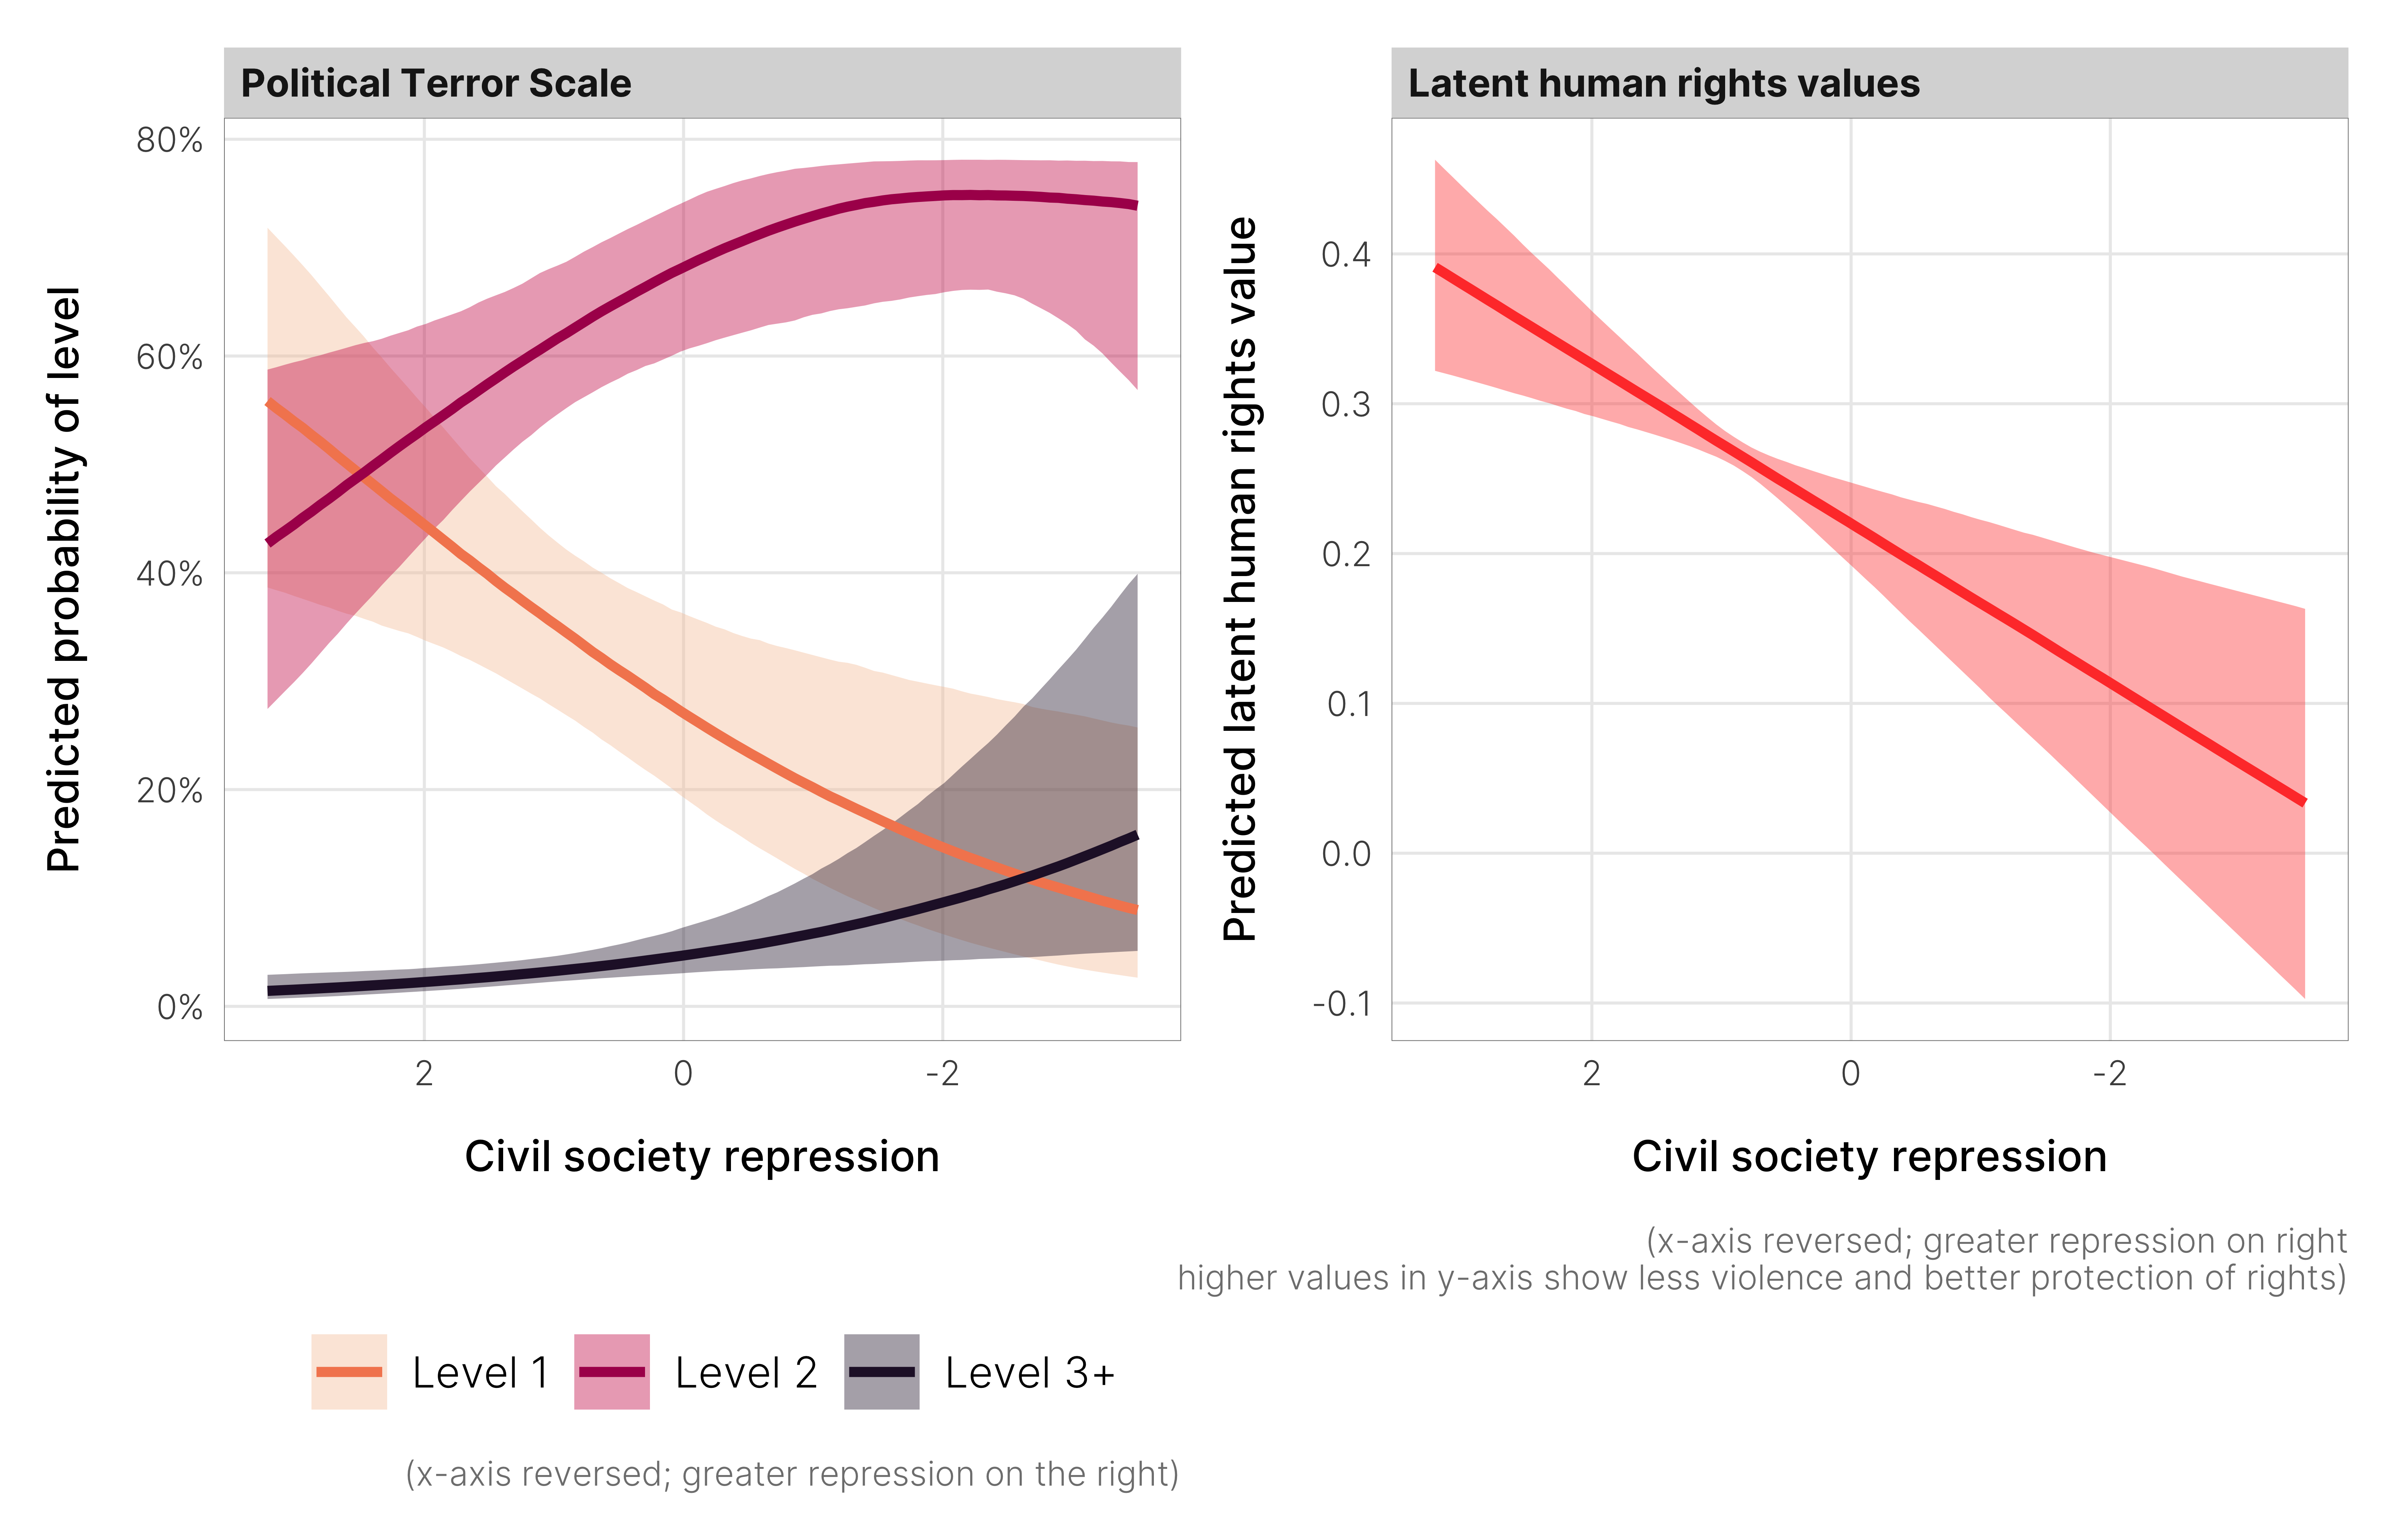 Marginal effects of changing levels of civil society repression on the probability of specific levels of political terror and predicted latent human rights values